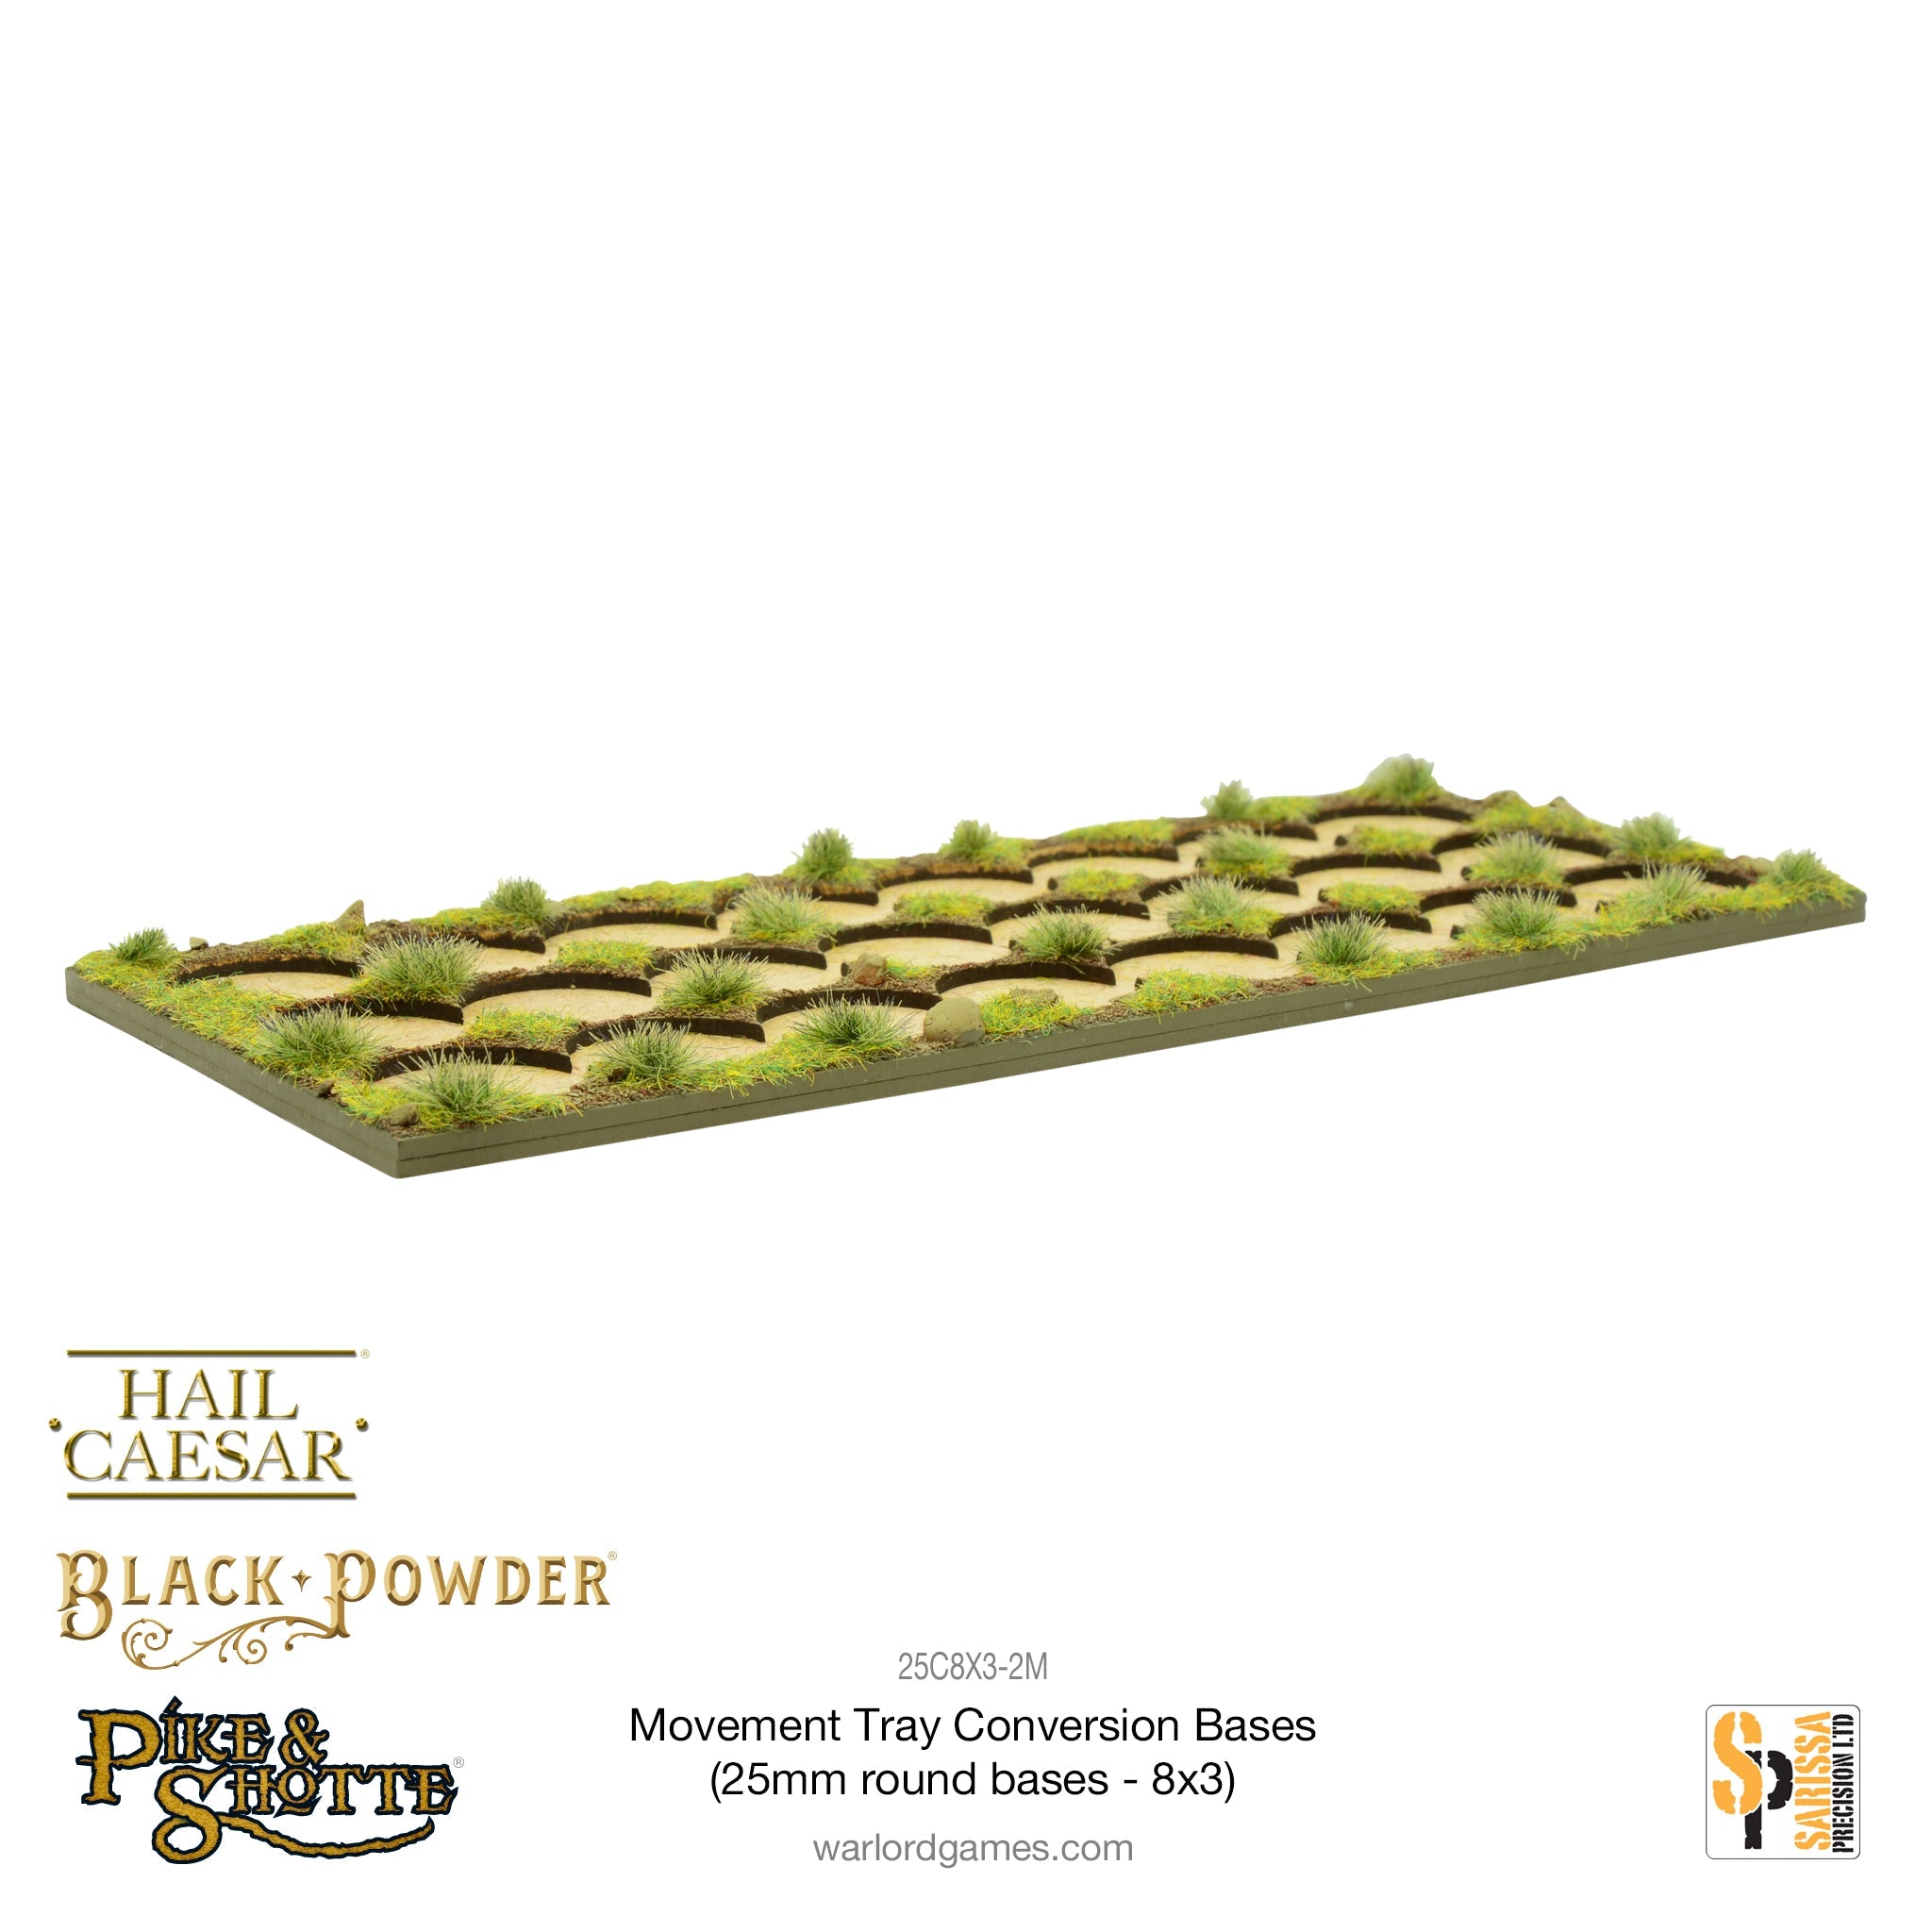 Movement Tray Conversion Bases (25mm round bases - 8x3)